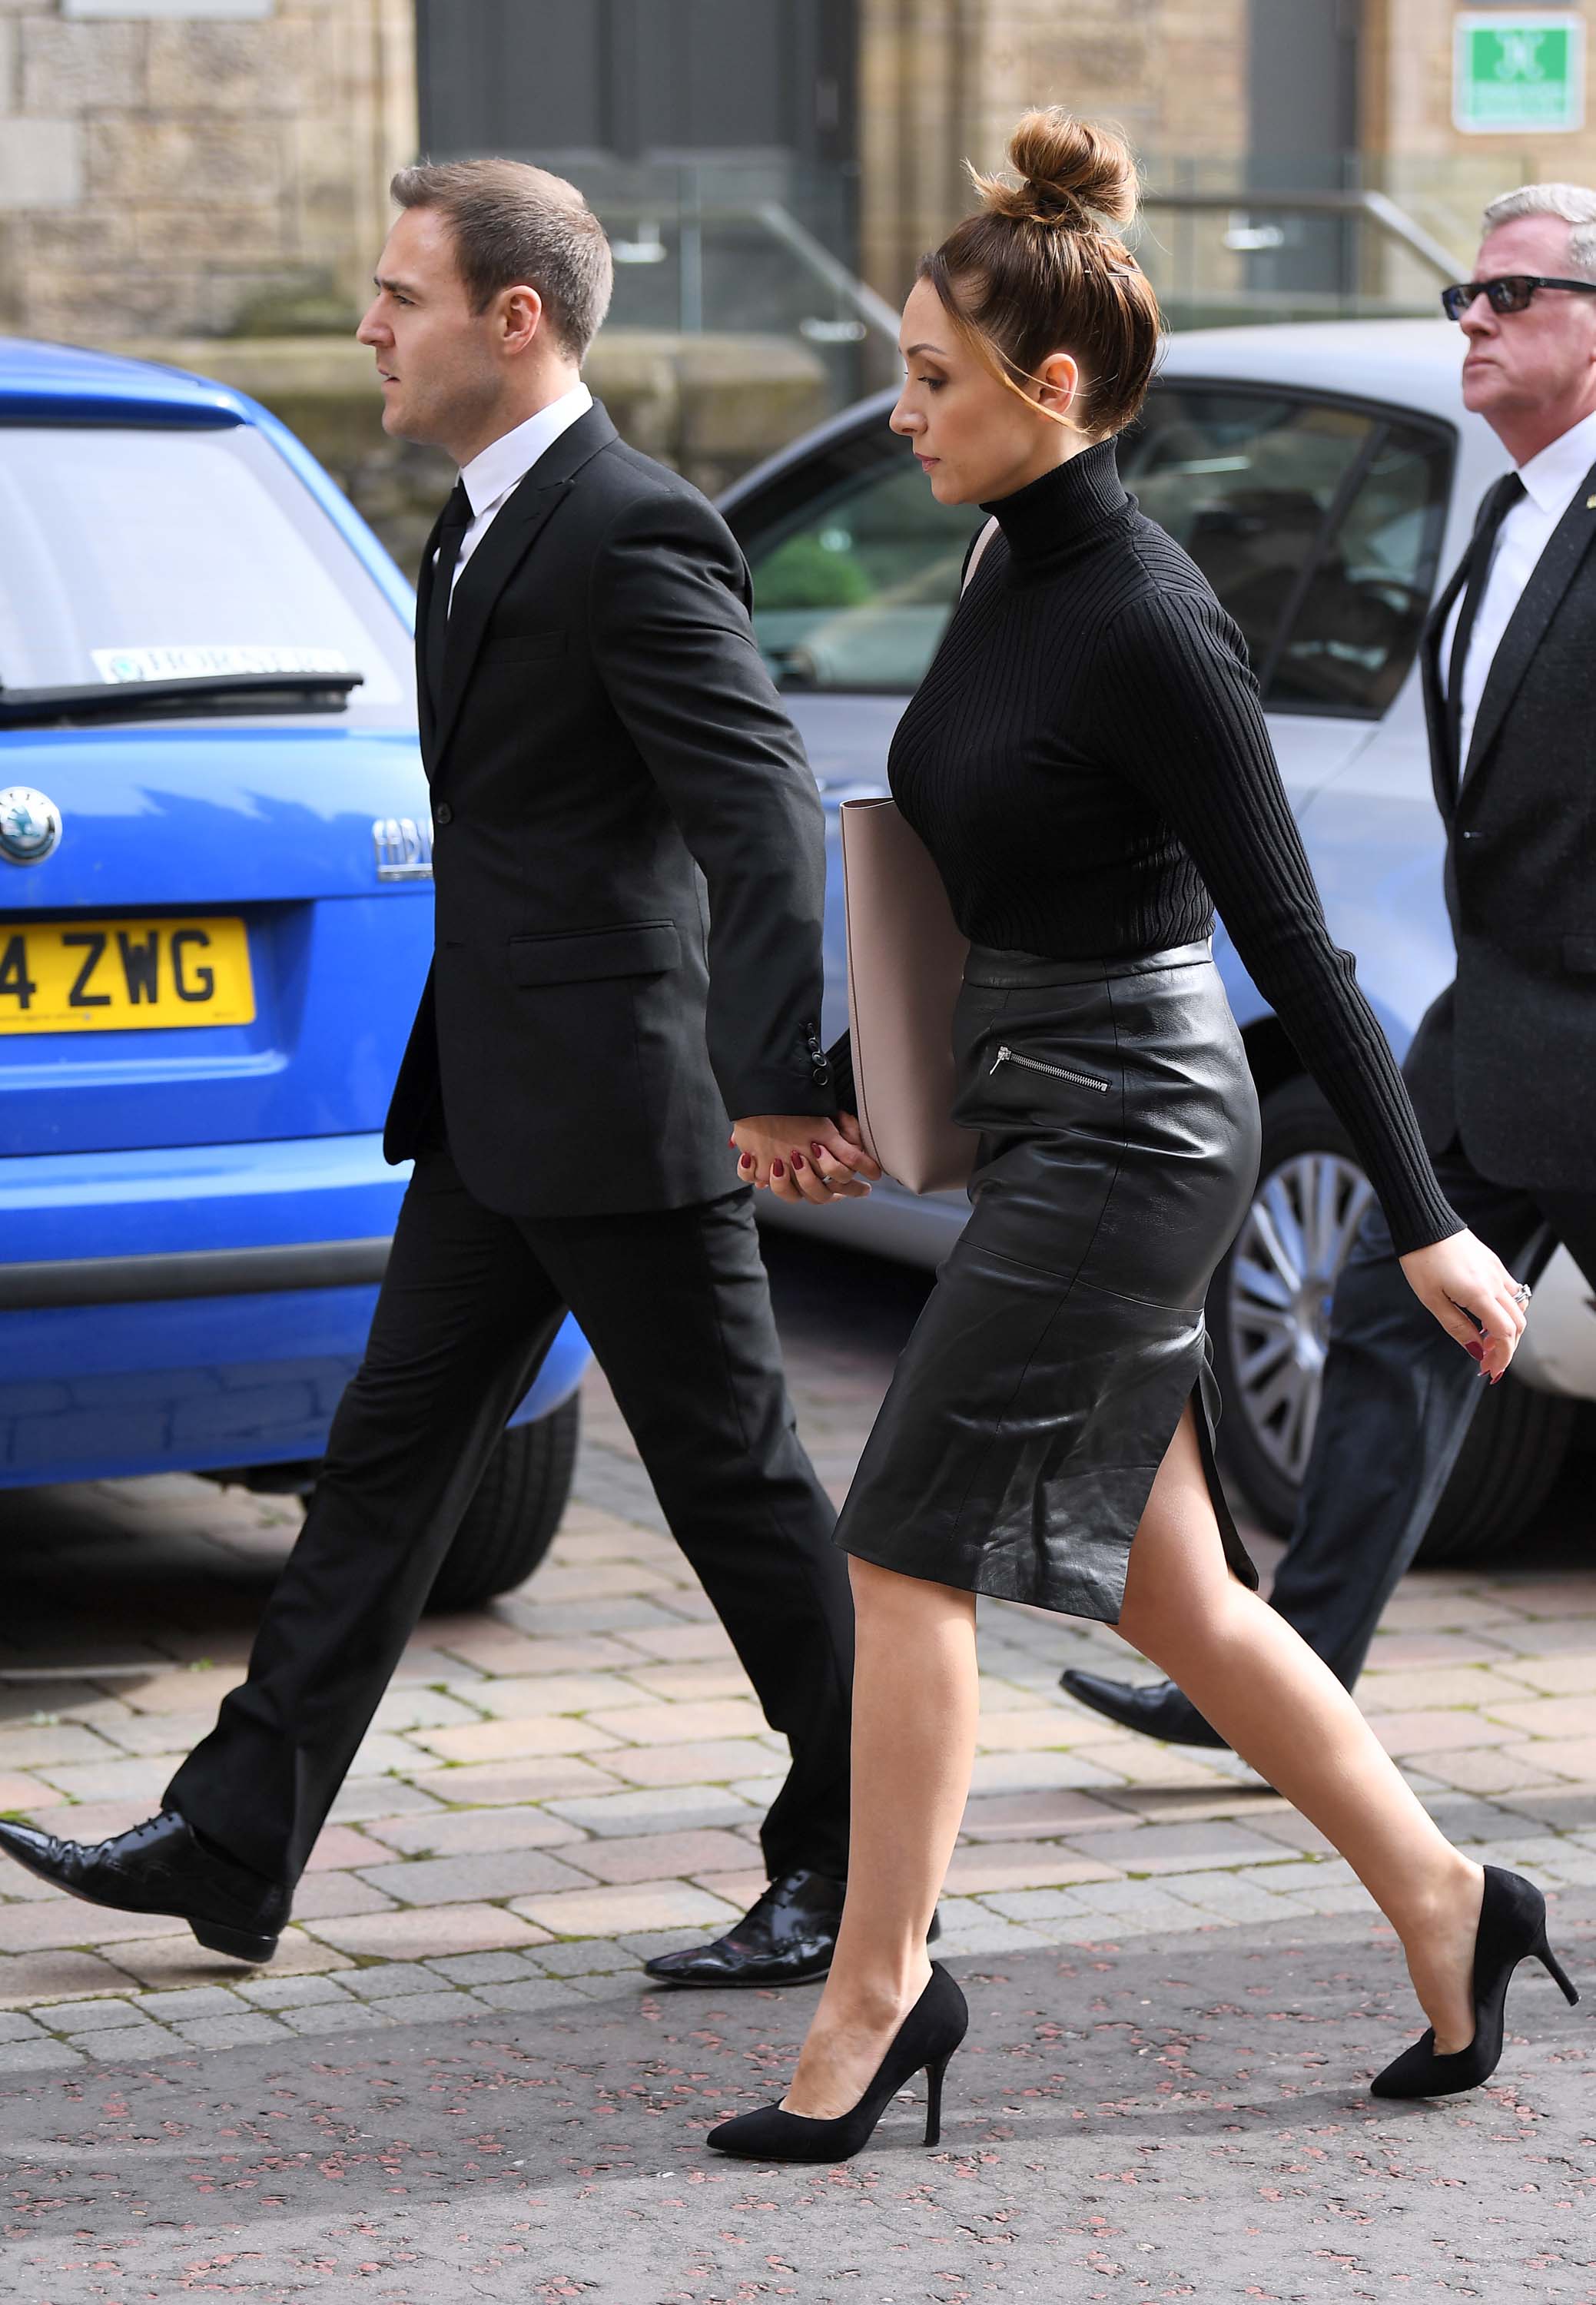 Lucy-Jo Hudson arriving for the funeral of Liz Dawn